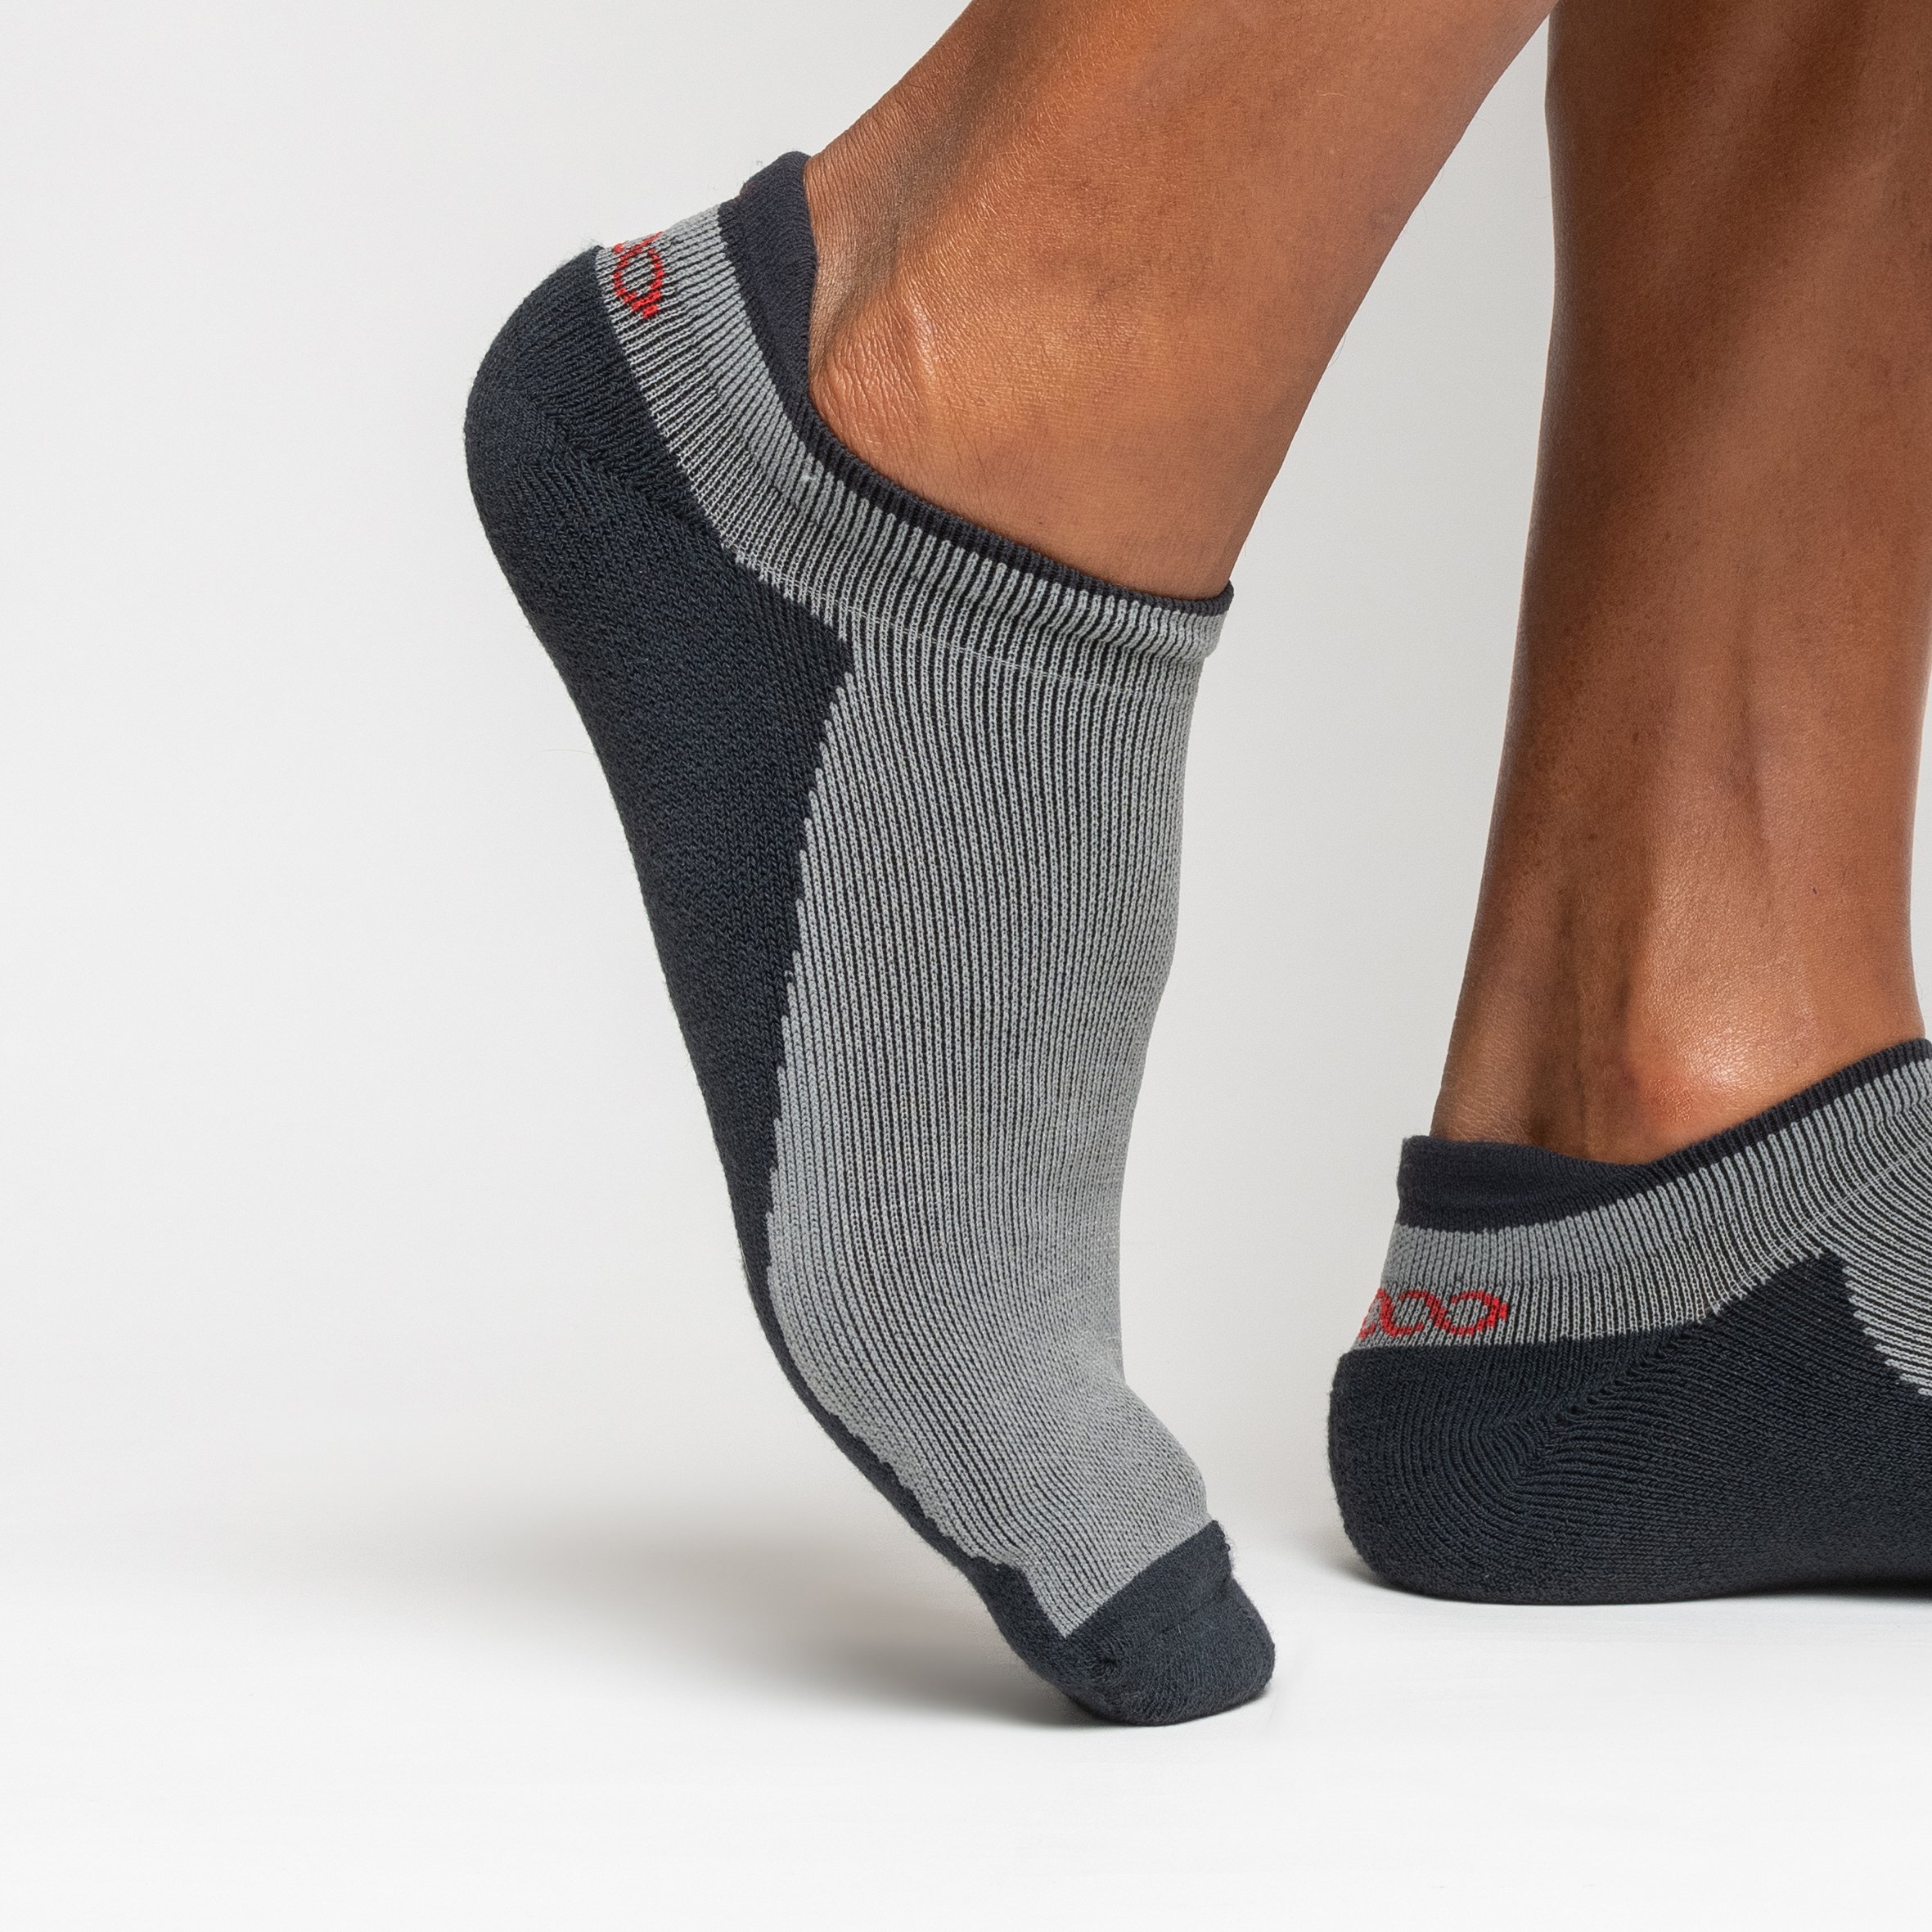 Agogo Active | Crew, Low-Cut and No-show Socks for Men and Women